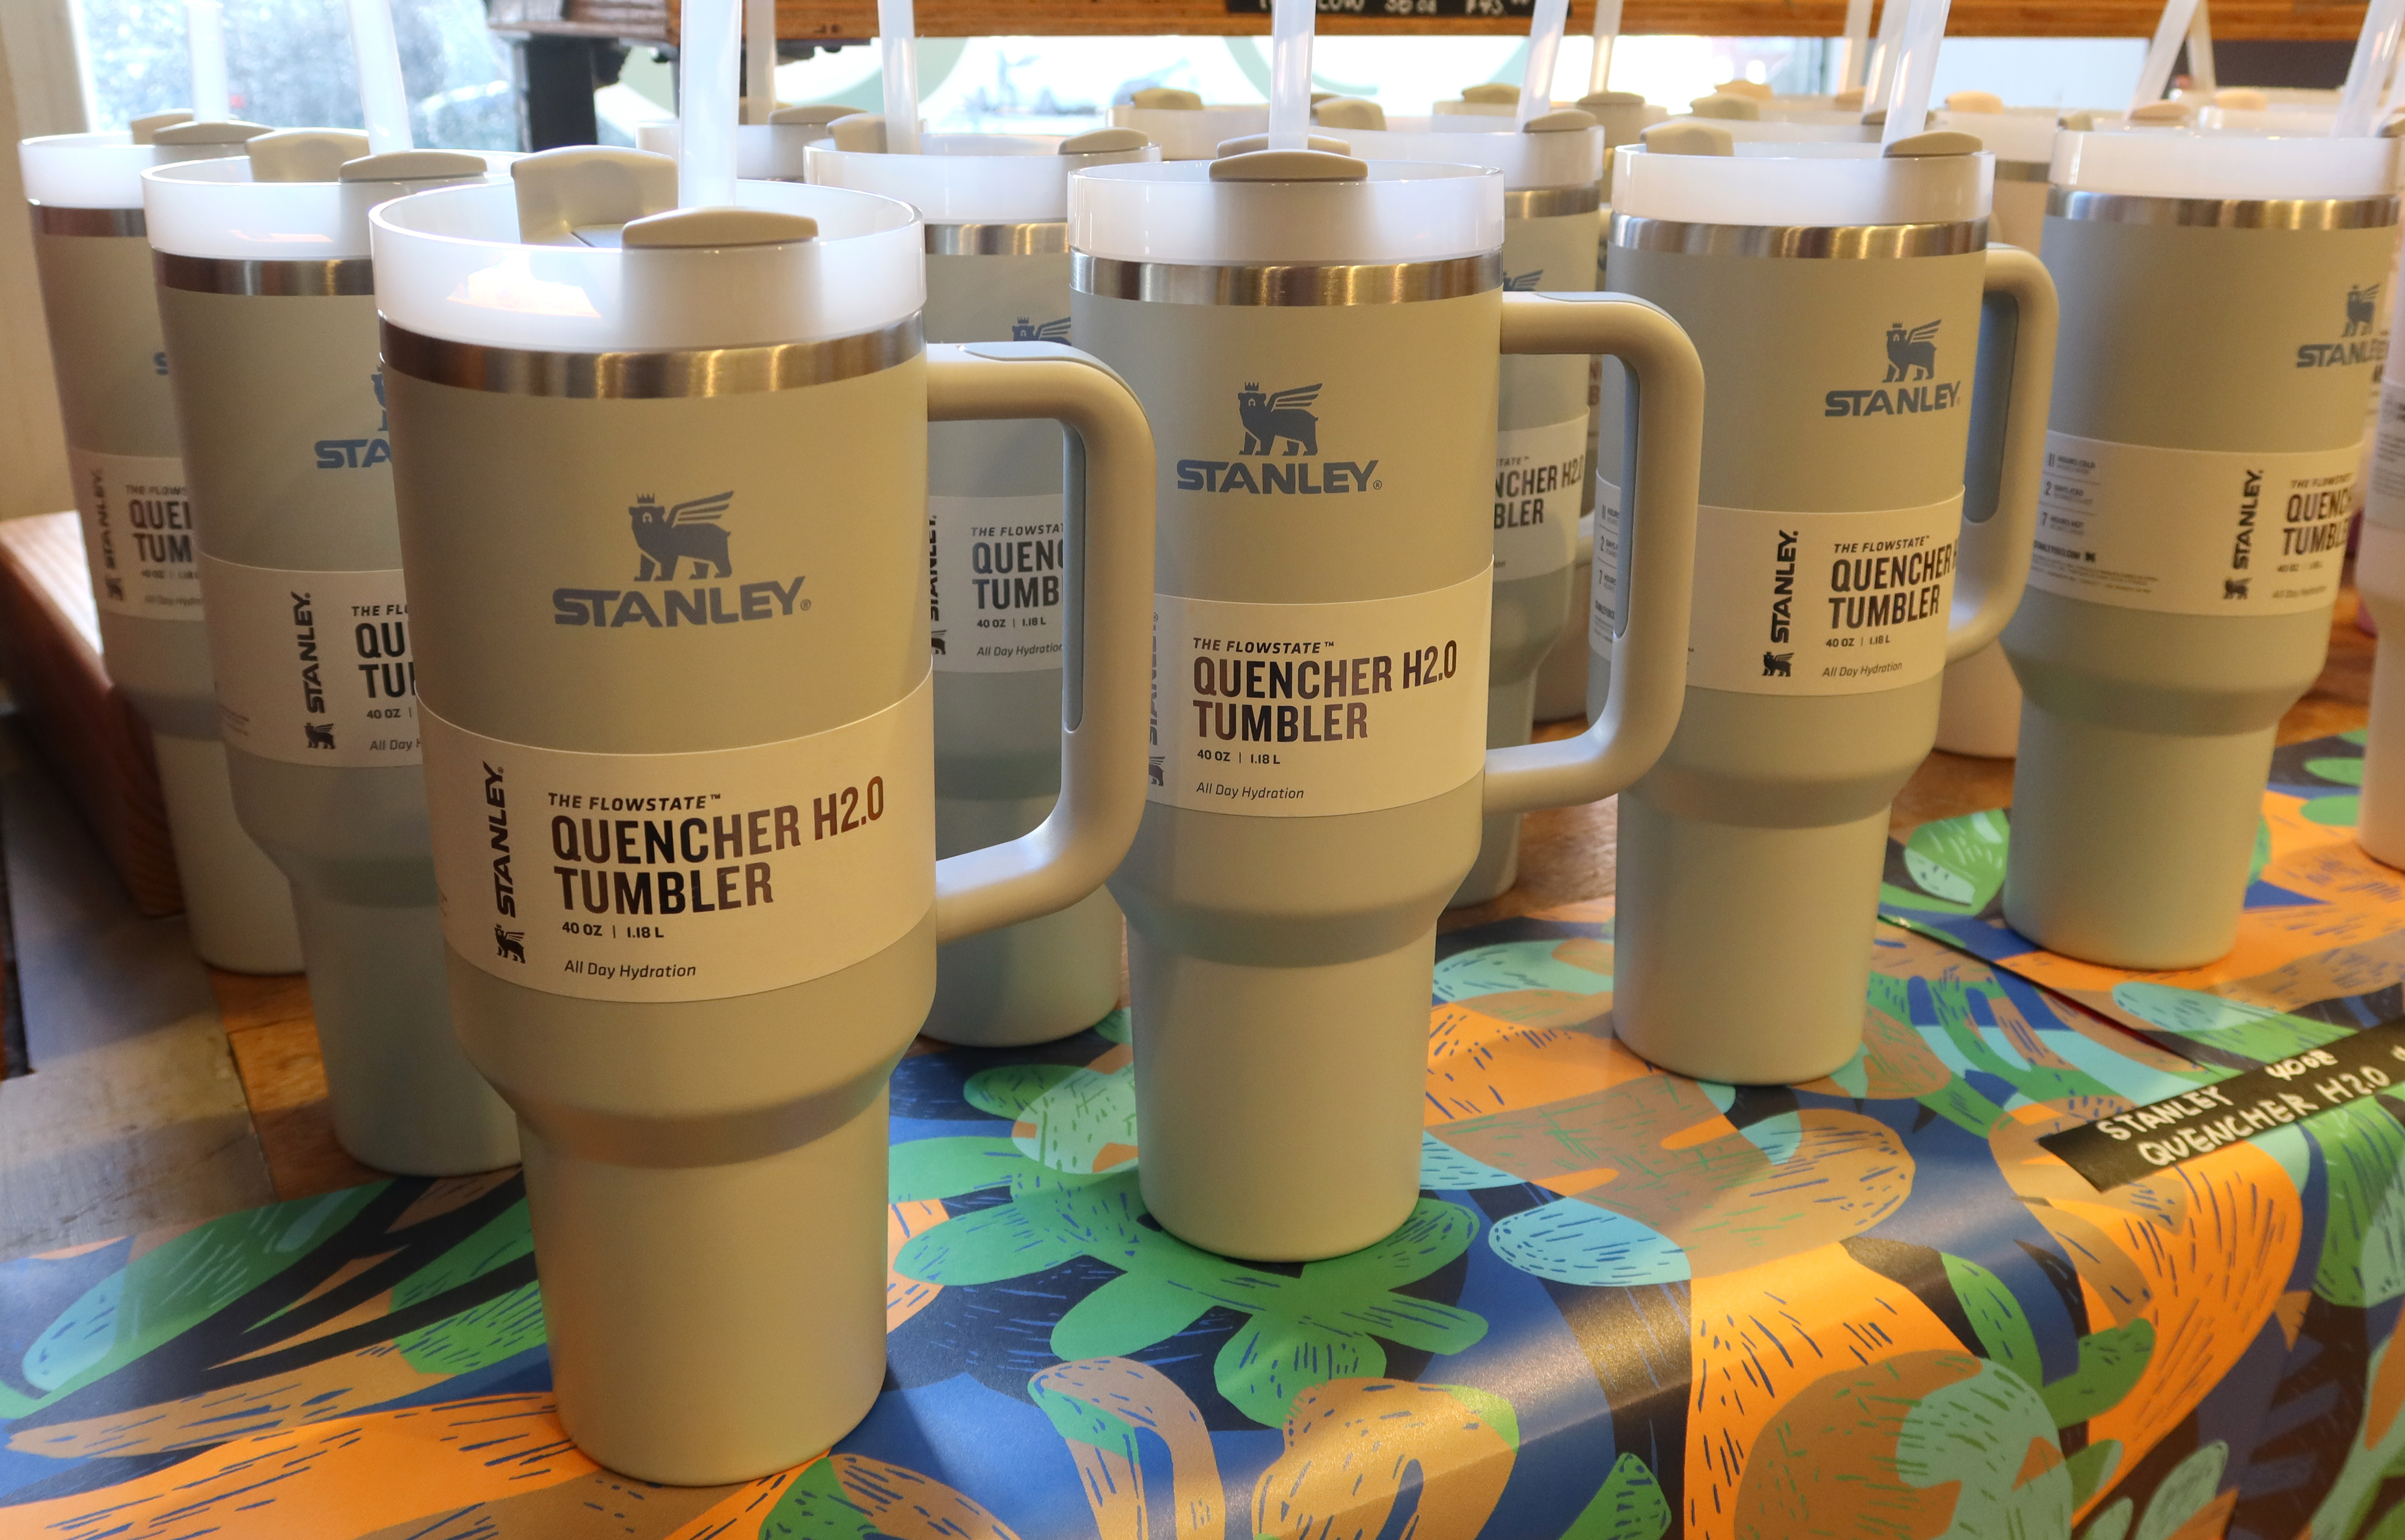 Several Stanley Quencher H2O tumblers displayed on a patterned tablecloth